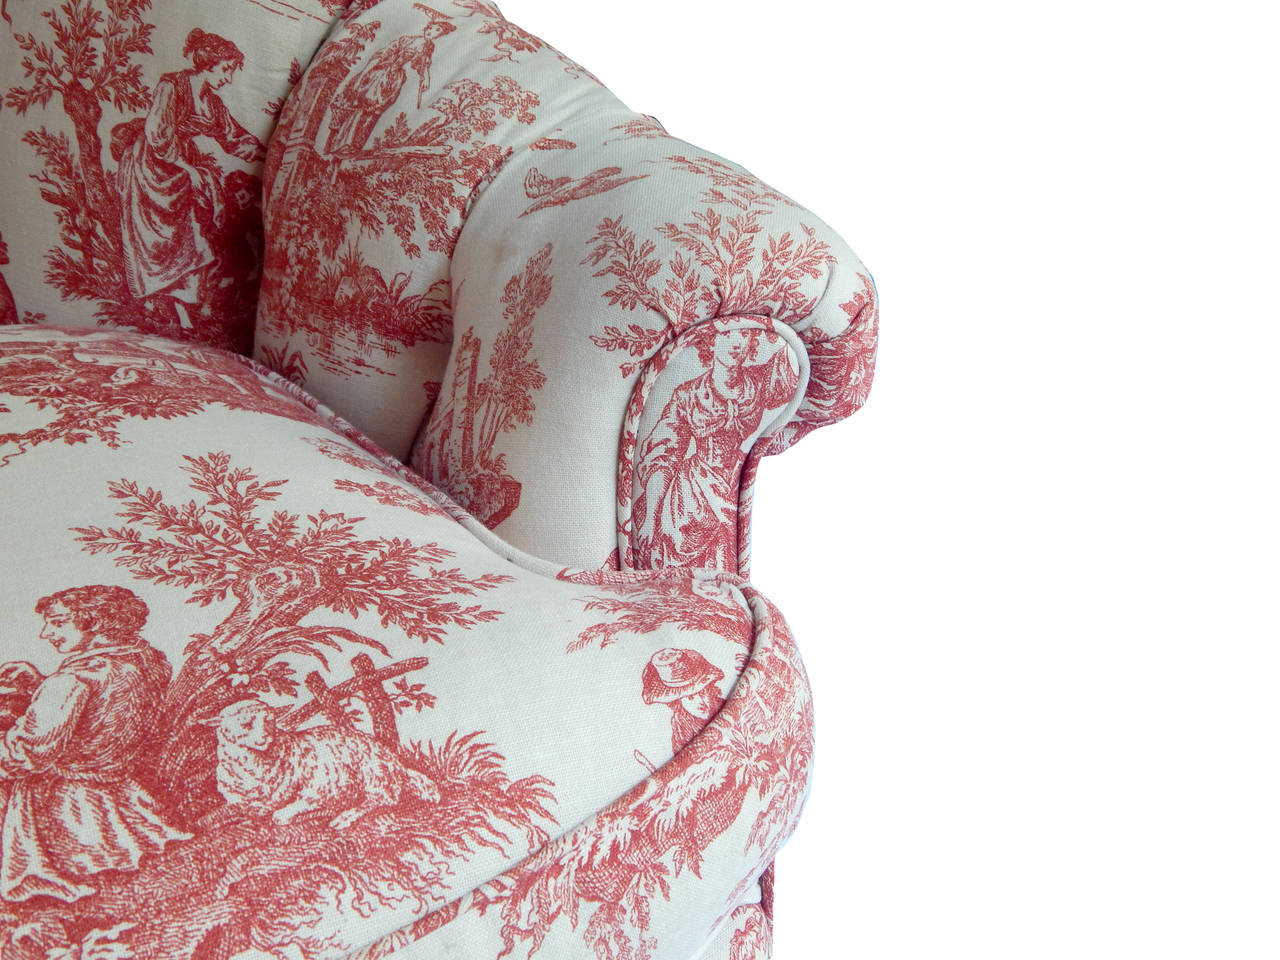 20th Century Pair of Tufted Toile Loveseats